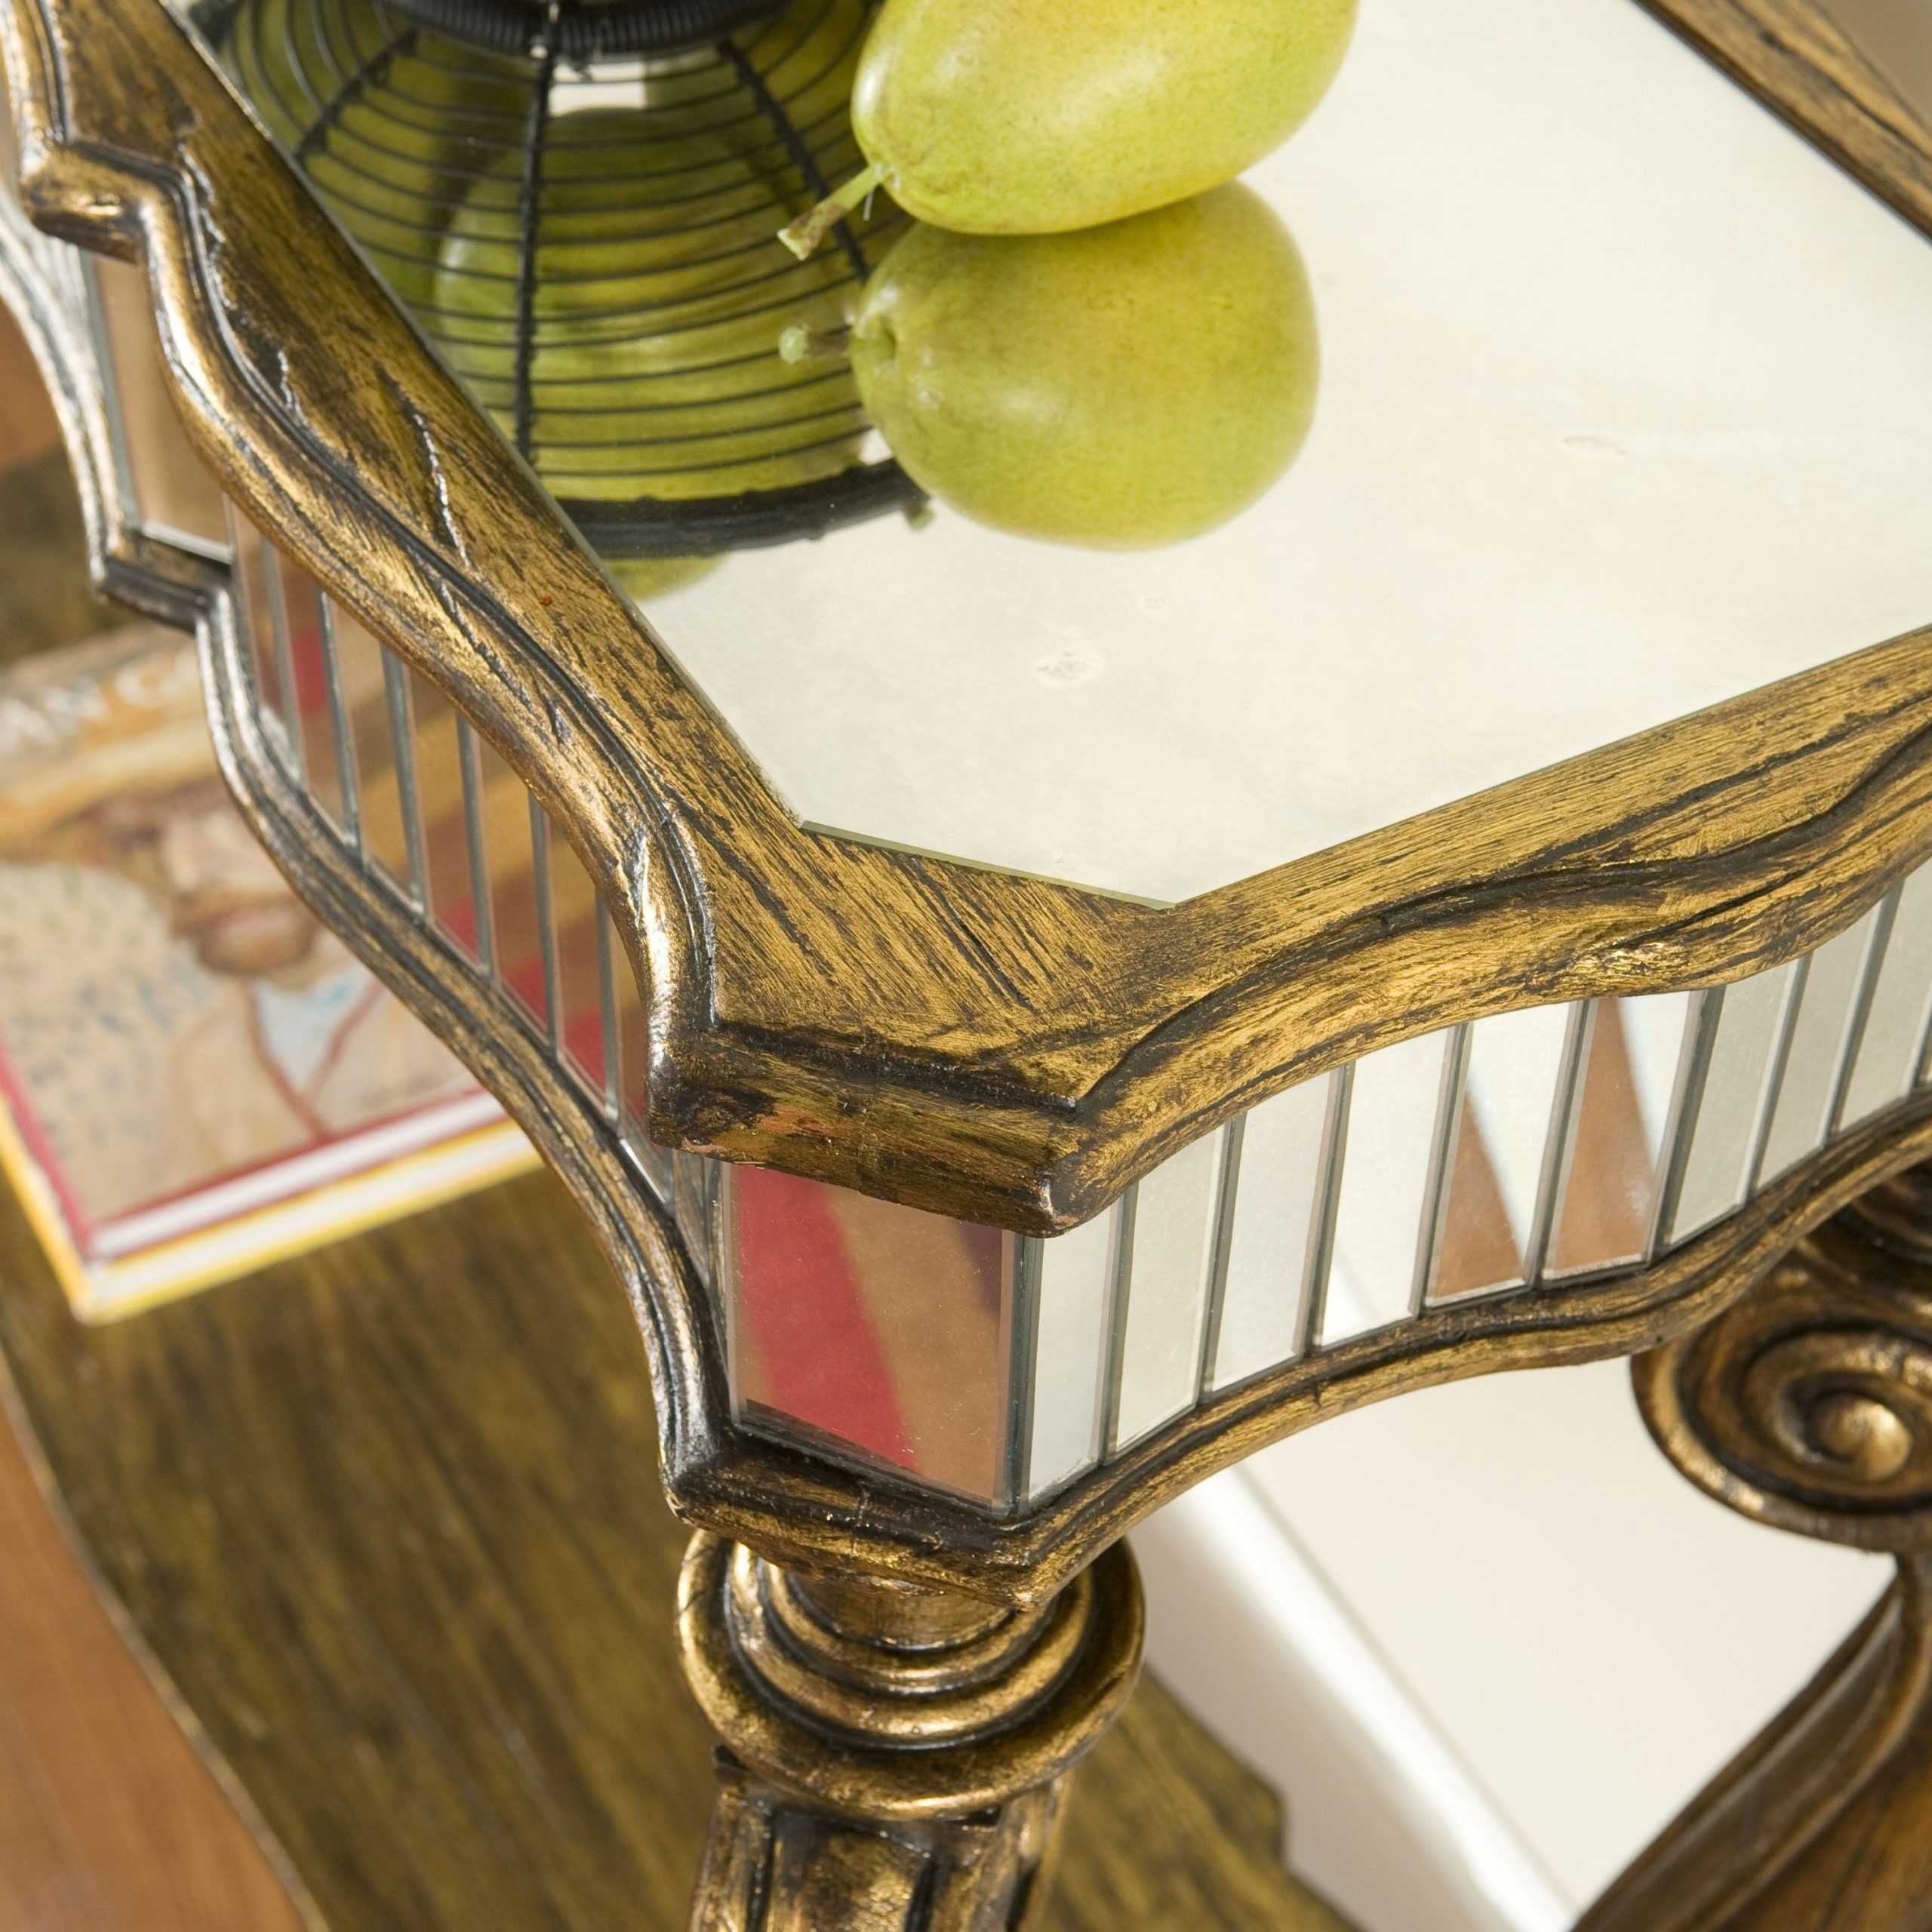 Voranado Cabriole Console Table Close Up — Bringing Intended For Antiqued Gold Leaf Console Tables (View 20 of 20)